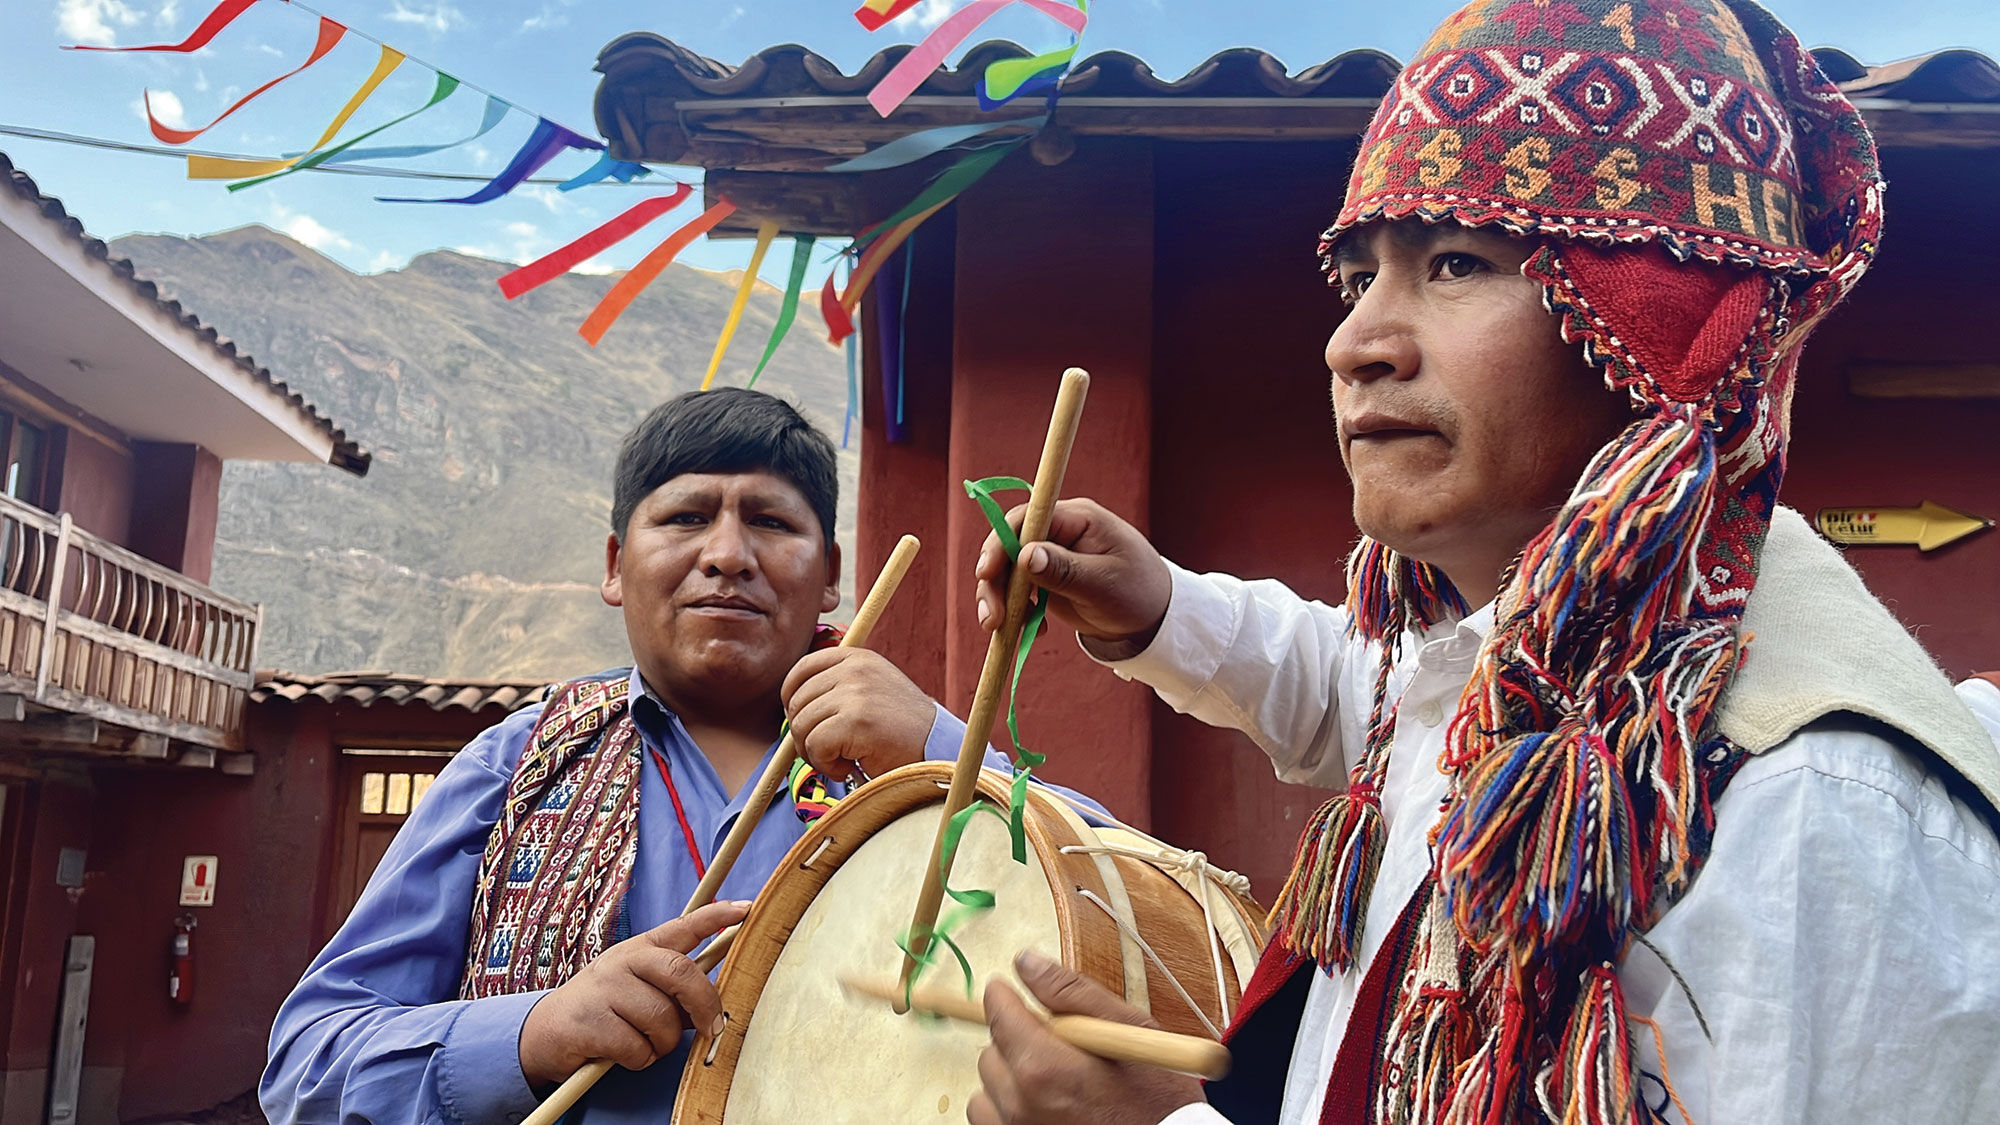 Peruvian men play music on traditional Andean instruments at the G Adventures-supported Parwa Community Restaurant.